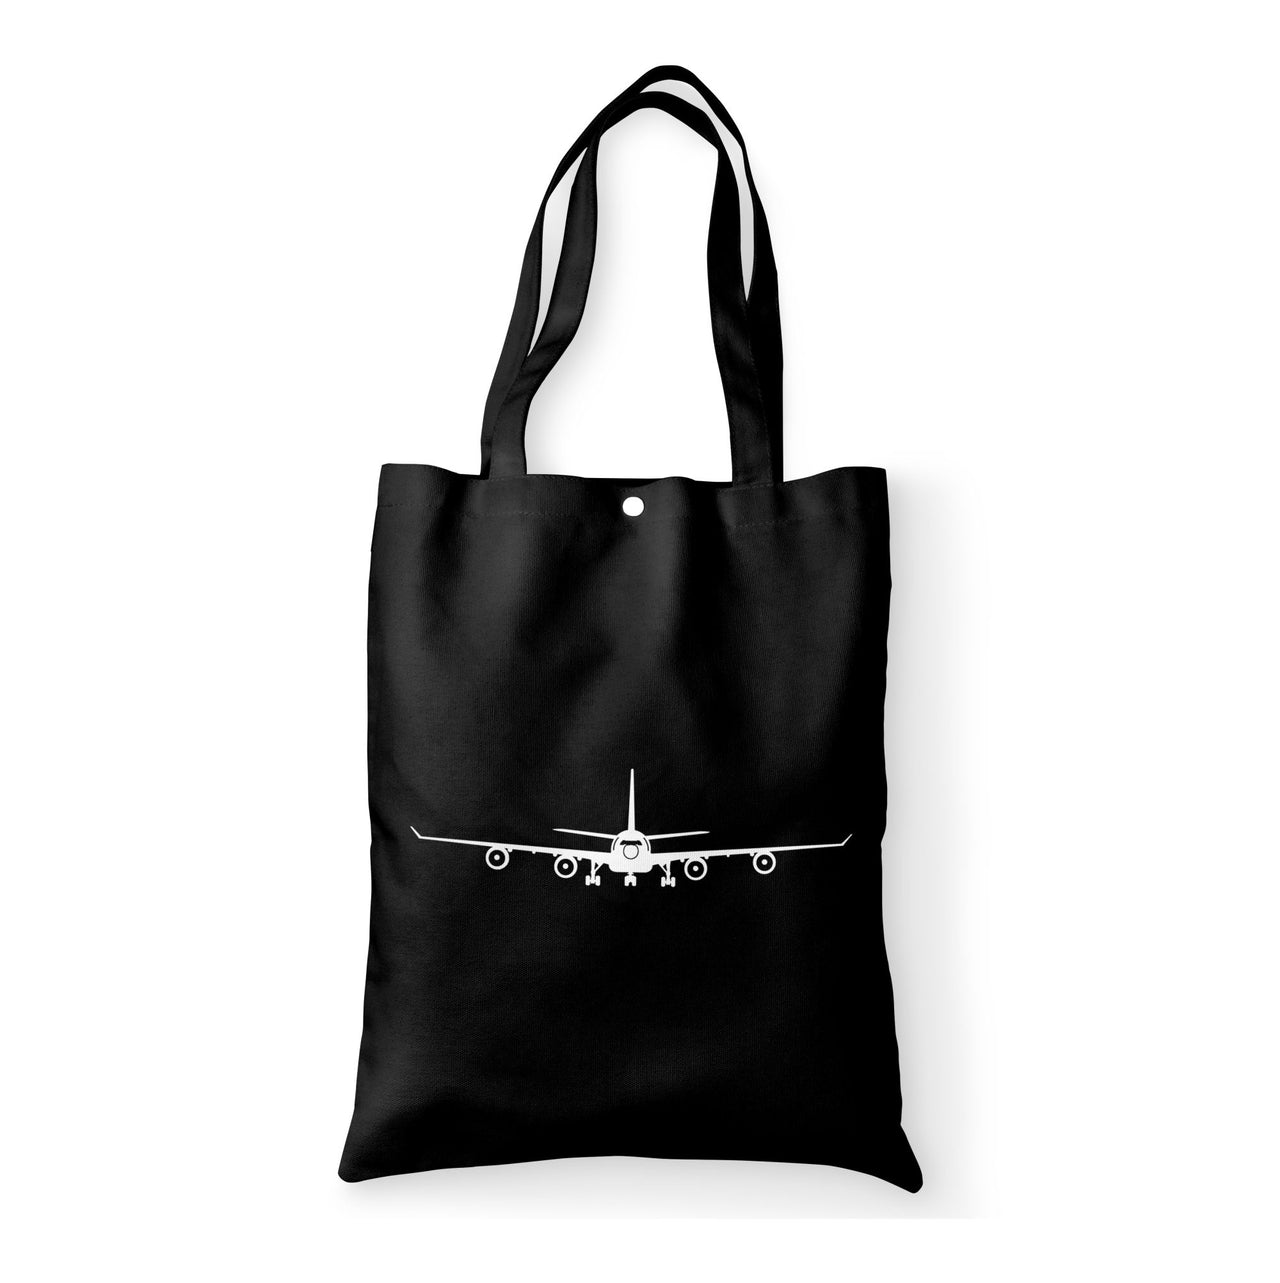 Airbus A340 Silhouette Designed Tote Bags